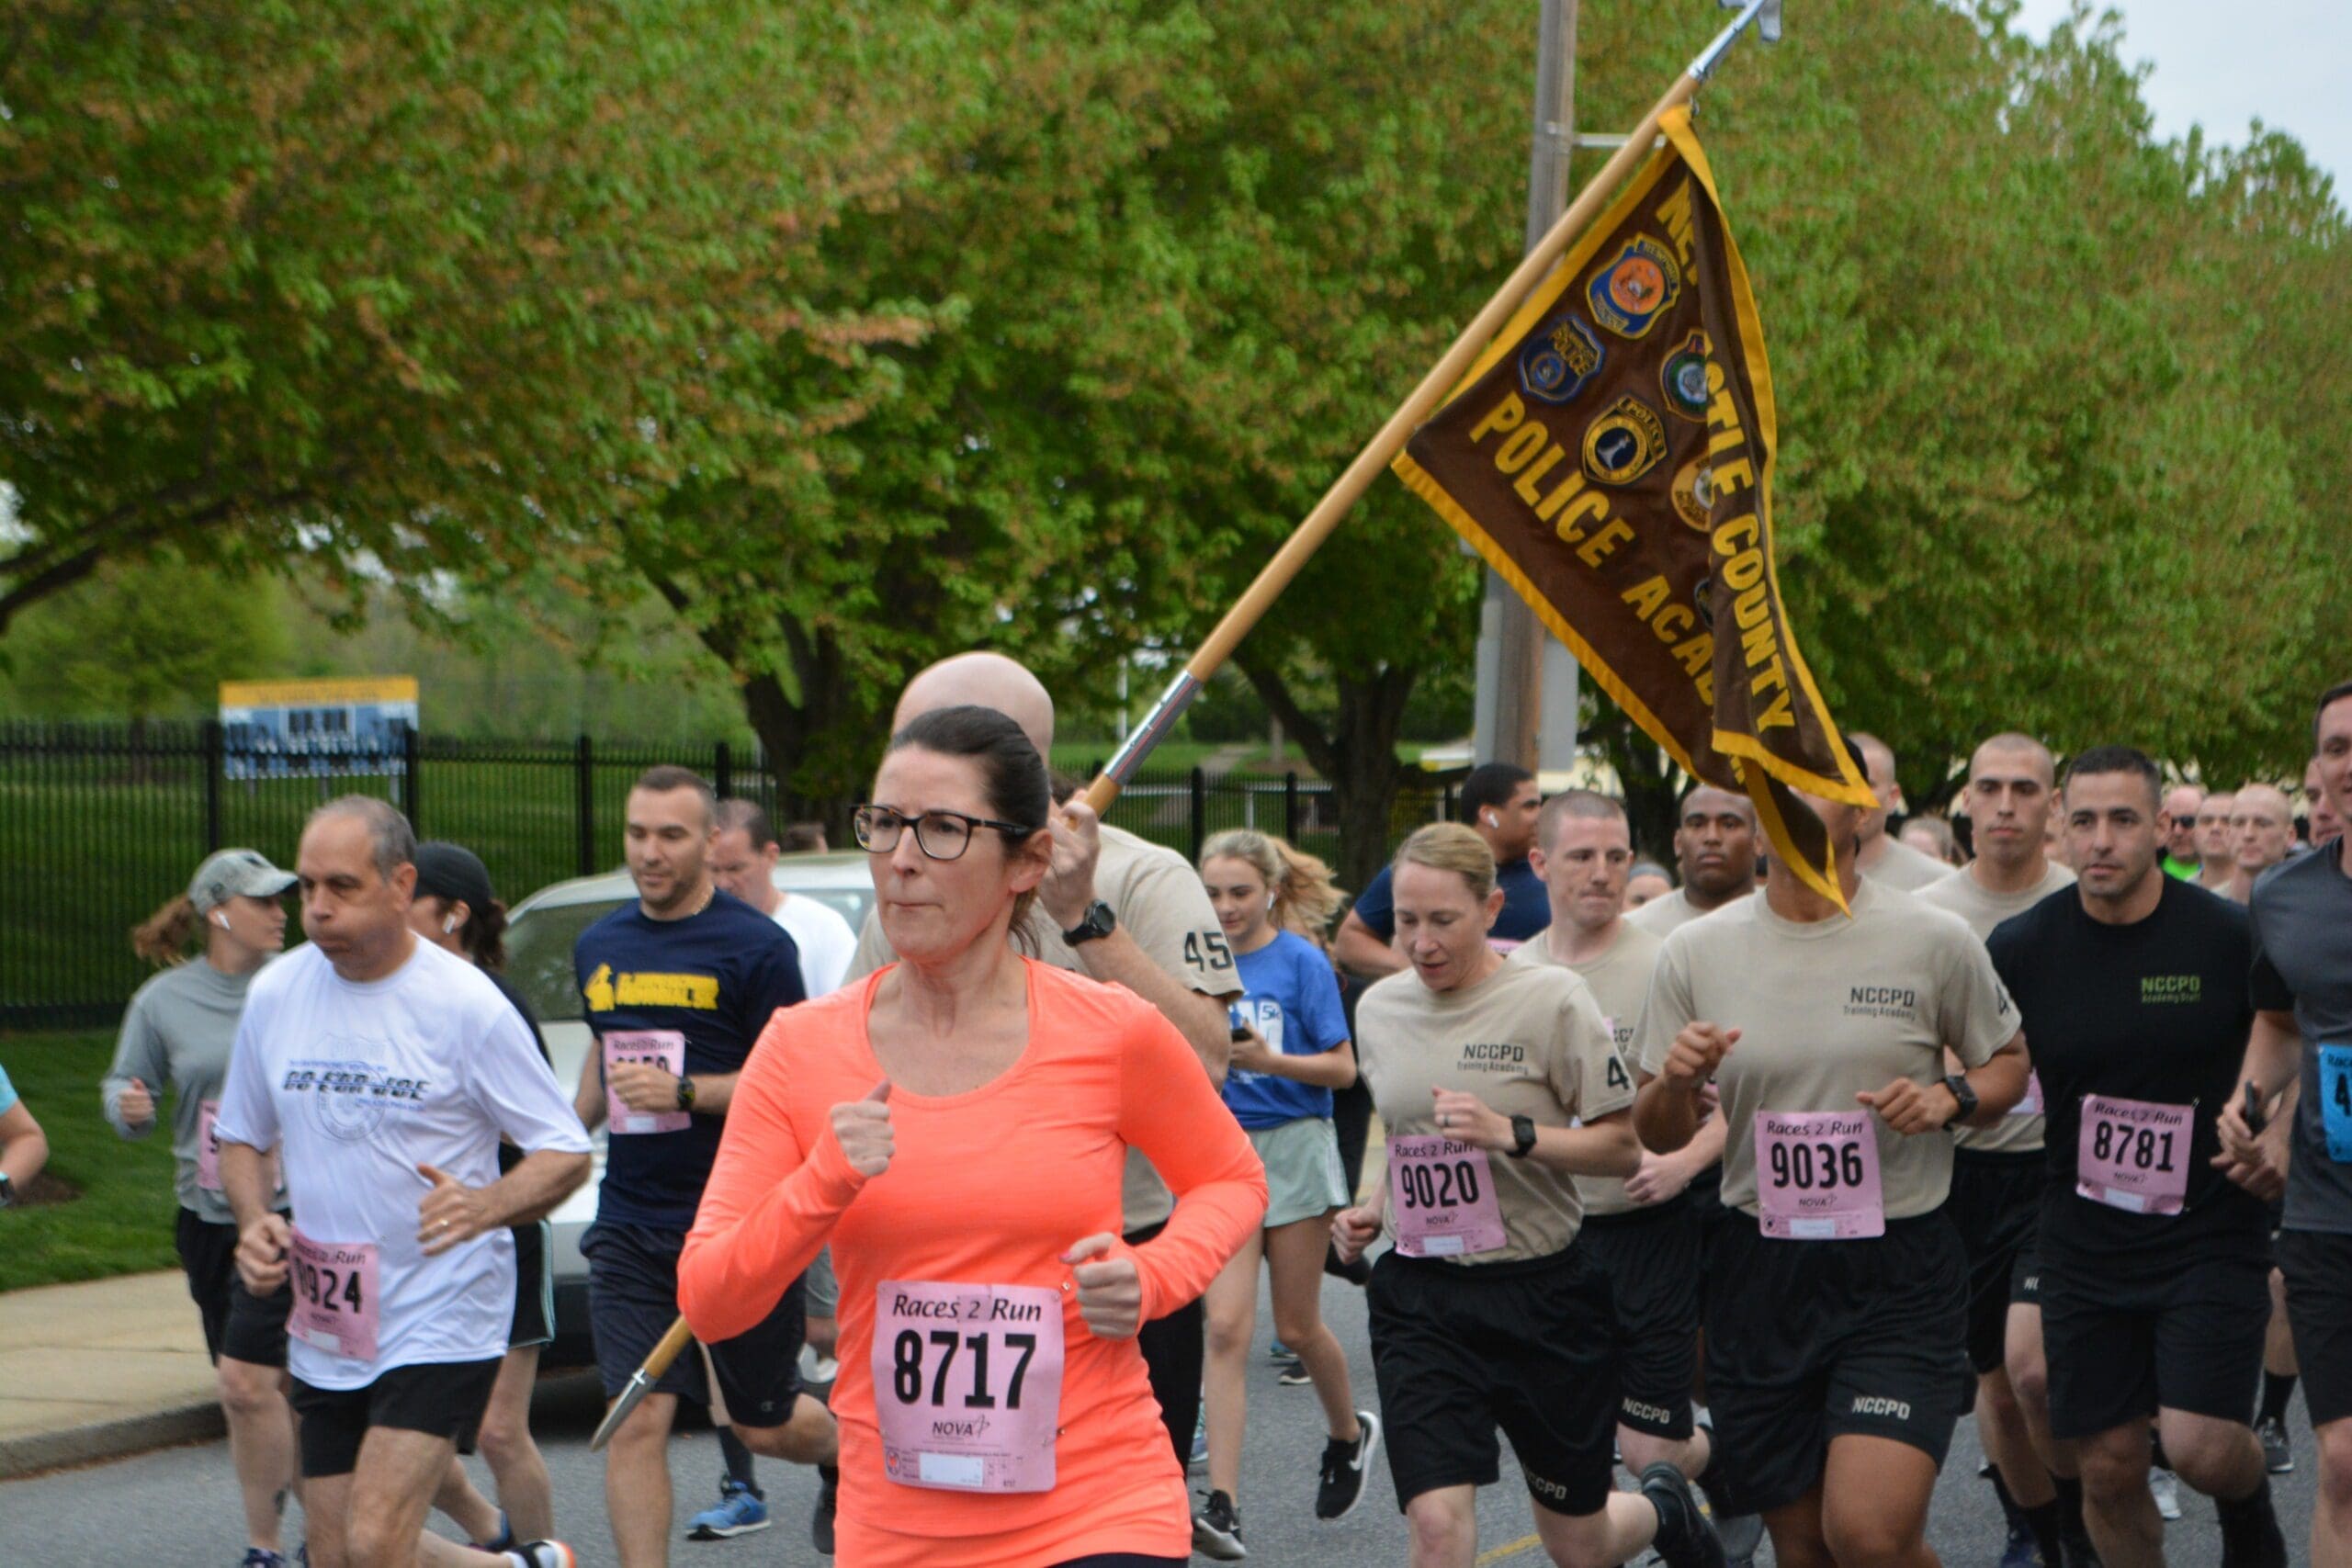 Featured image for “Salesianum unites for 5k honoring fallen officer Szczerba ”